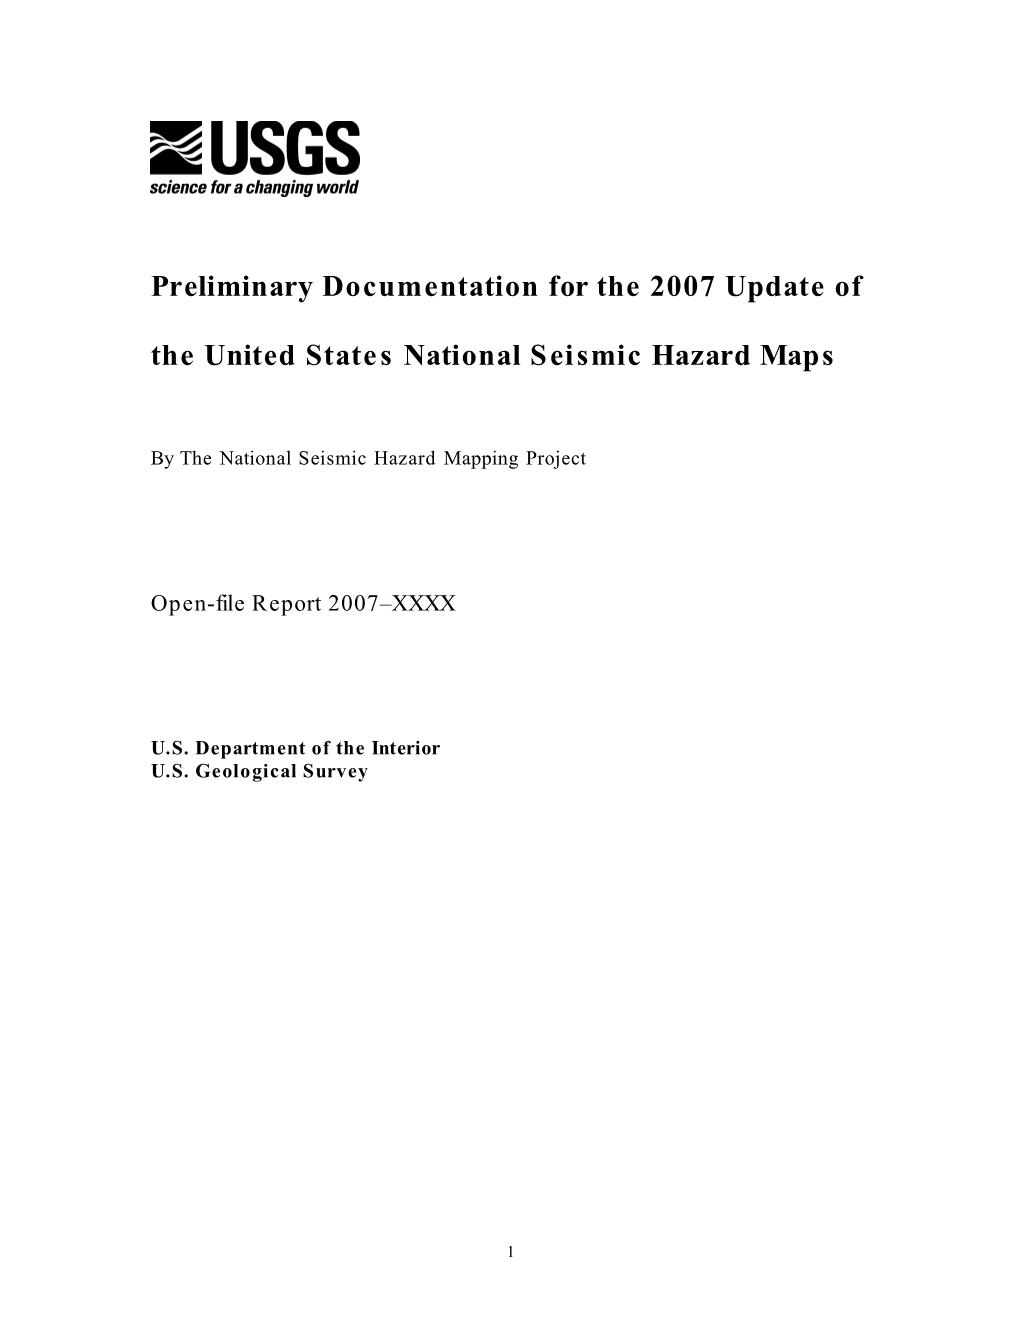 Documentation for the 2007 Update of the National Seismic Hazard Maps